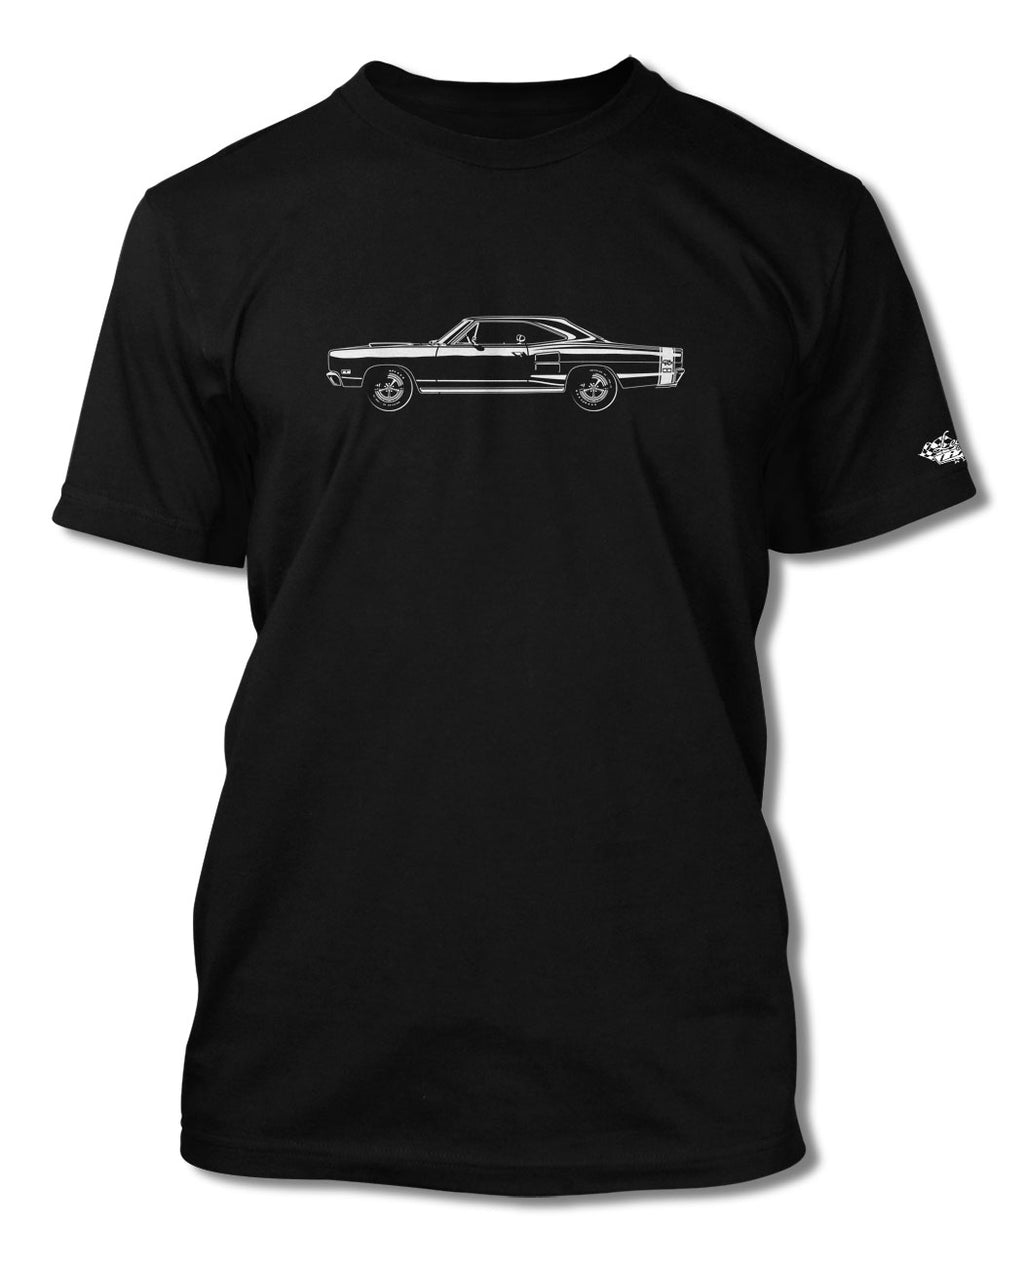 1969 Dodge Coronet RT Coupe with Stripes T-Shirt - Men - Side View